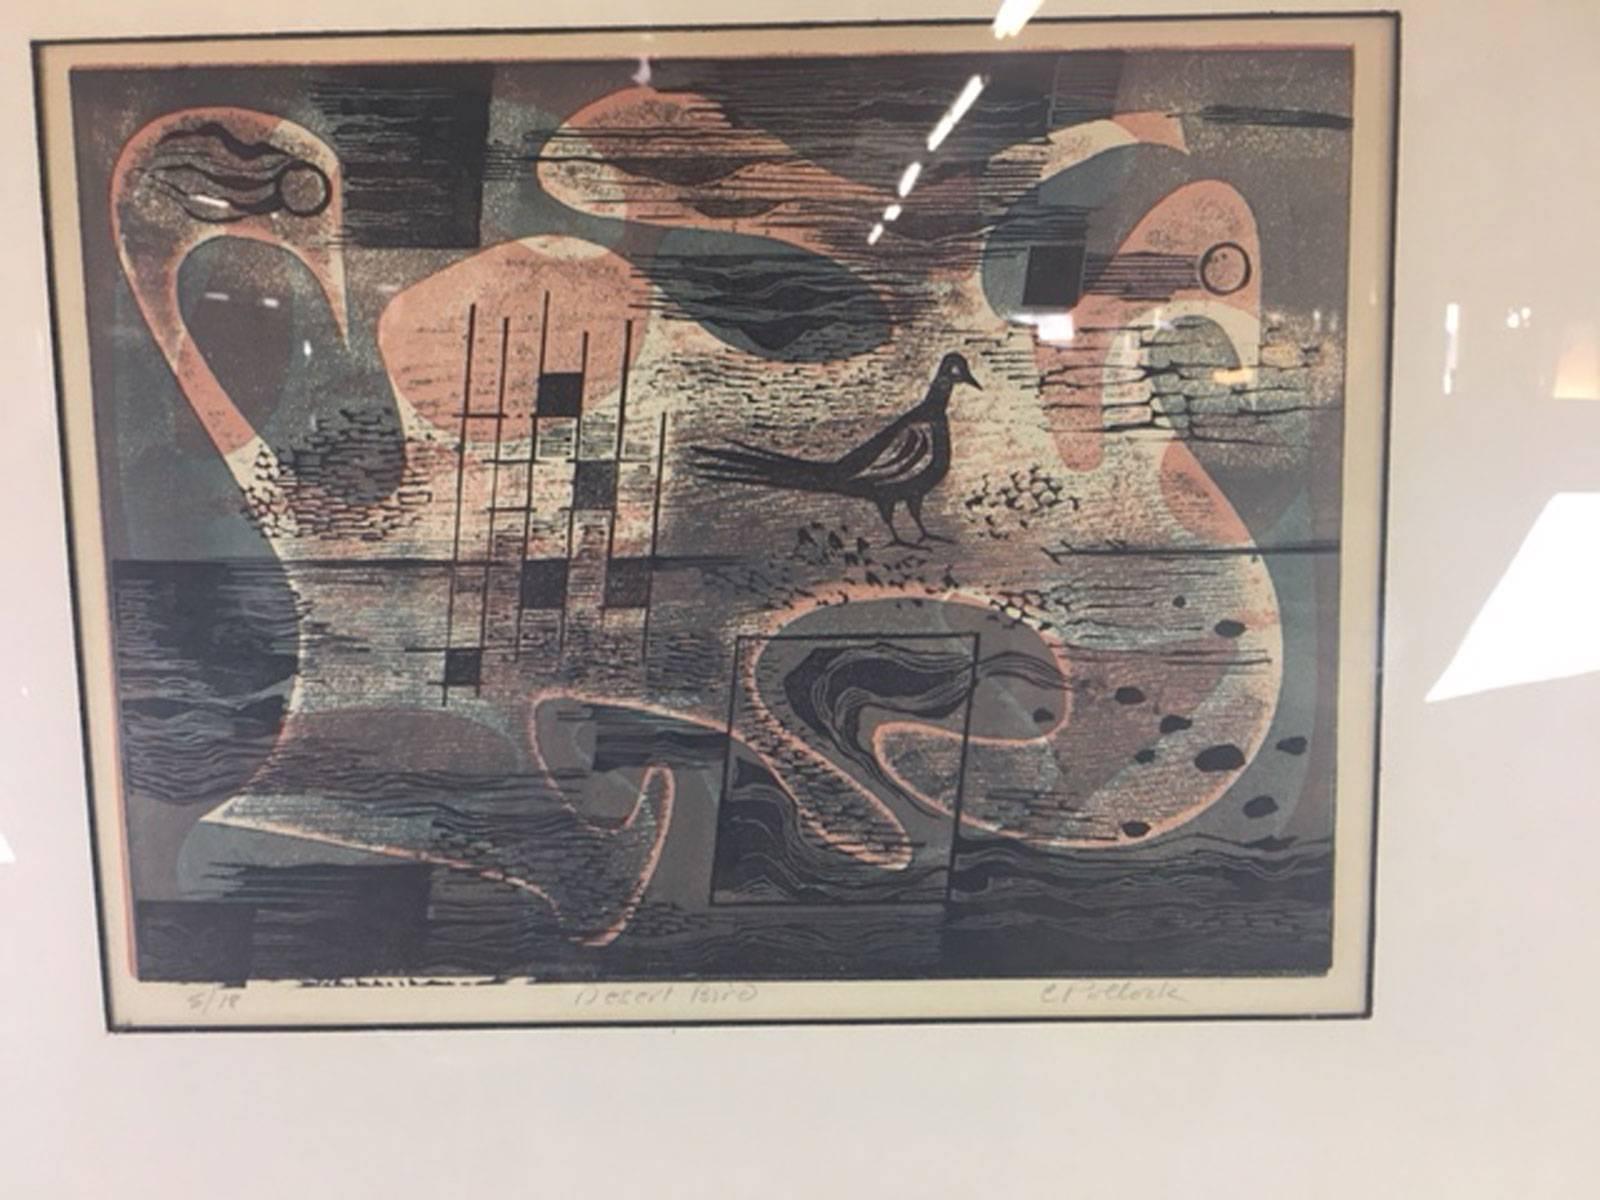 Linoleum block print by Charles Cecil Pollock, brother of Jackson Pollock. Print is titled 